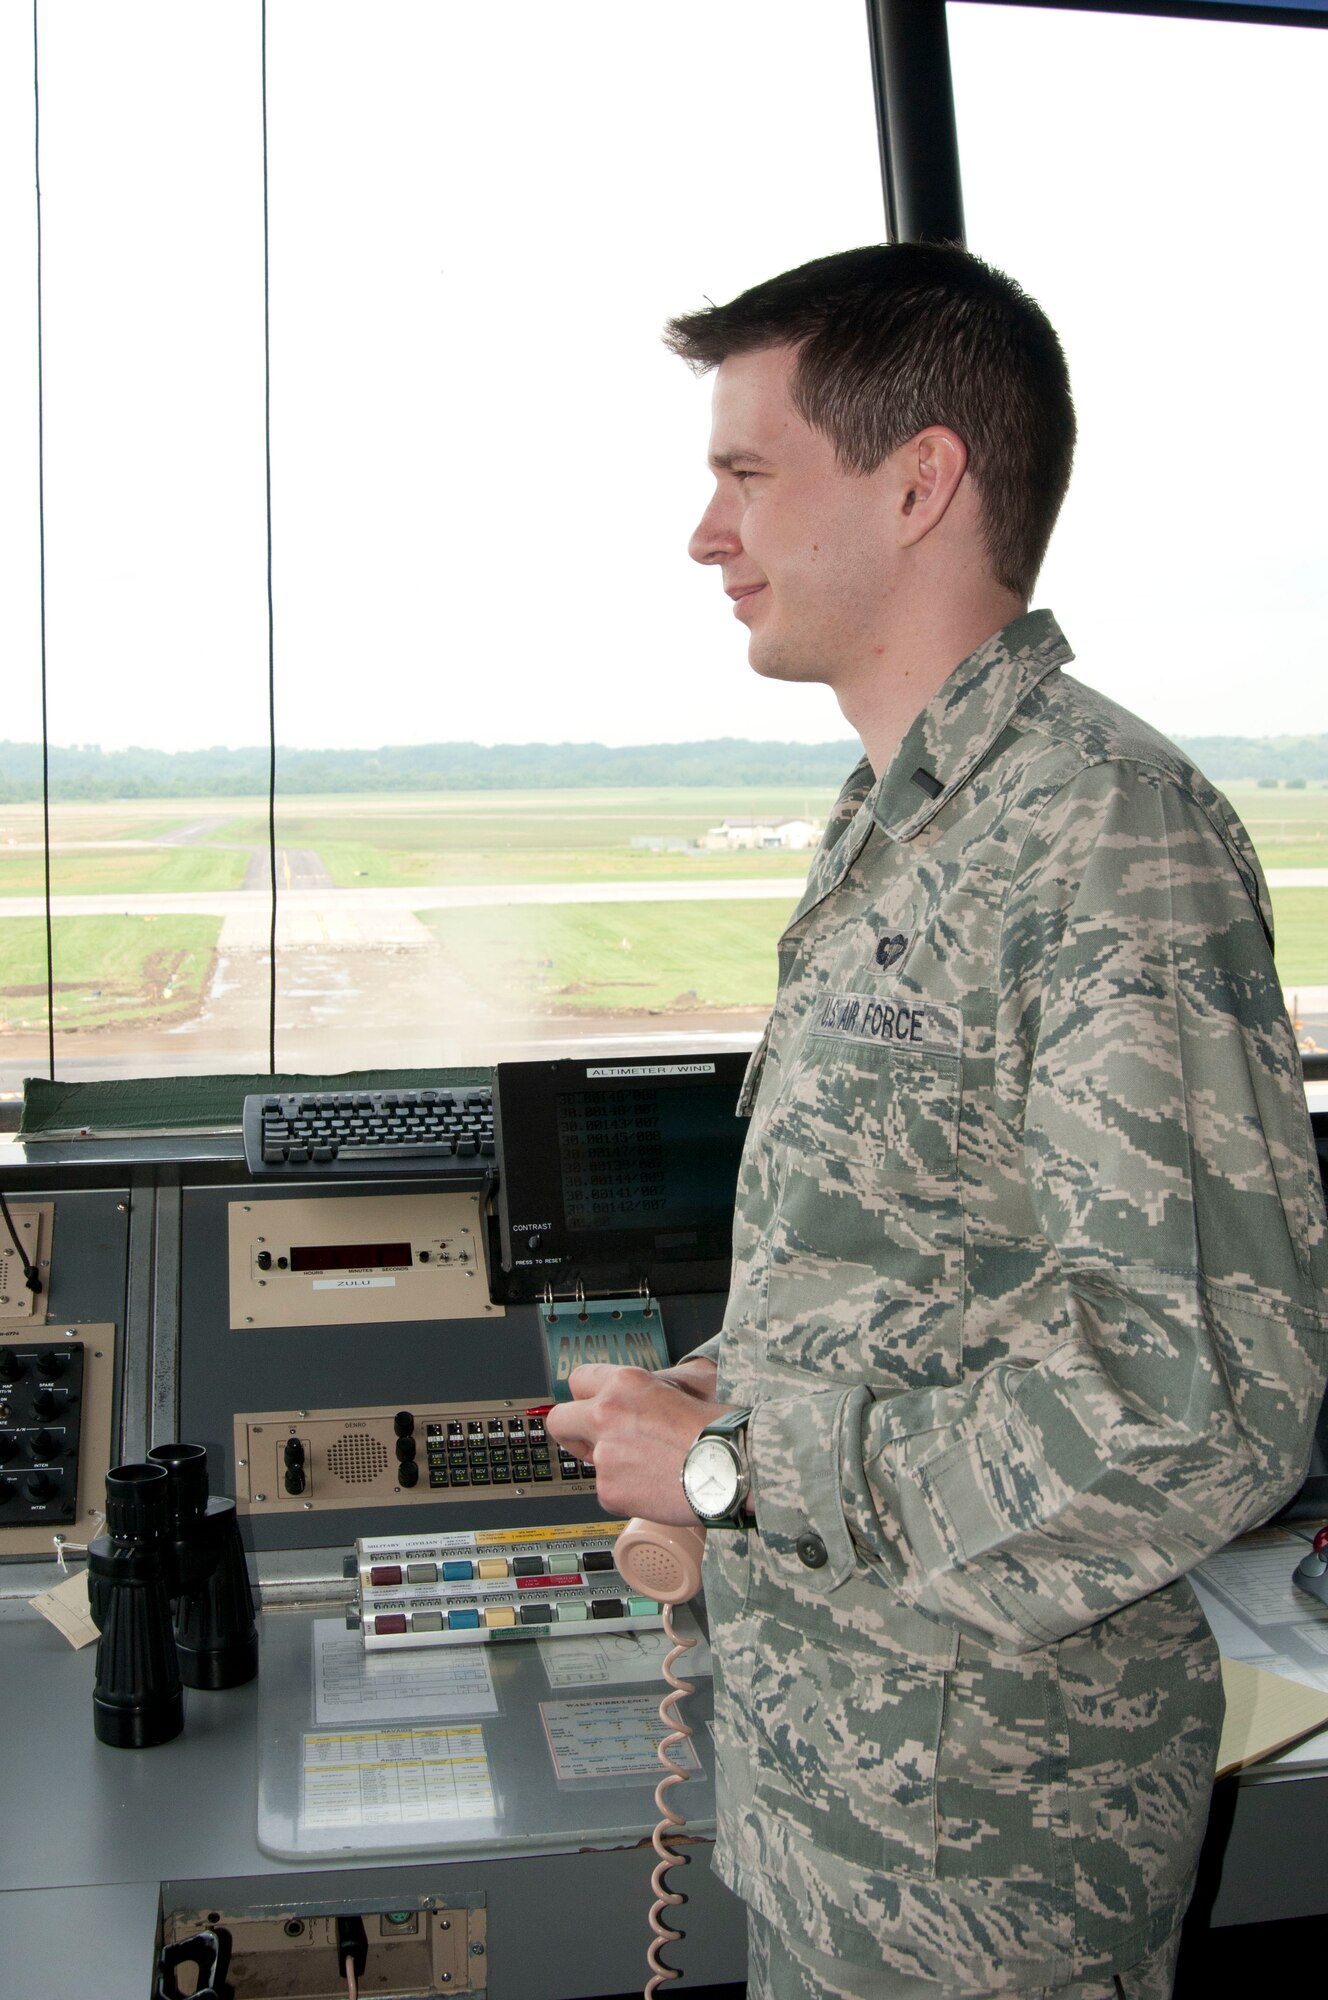 1st Lt. Michael D. Morris, 241st Air Traffic Control Squadron, is the last of seven active duty officer trainees to be certified through the Airfield Operations Officer Training Course June 2, 2011.  This program is located at Rosecrans Air National Guard Base, St. Joseph, Mo. (Photo by U.S. Air Force Airman 1st Class Kelsey Stuart/NOT RELEASED)